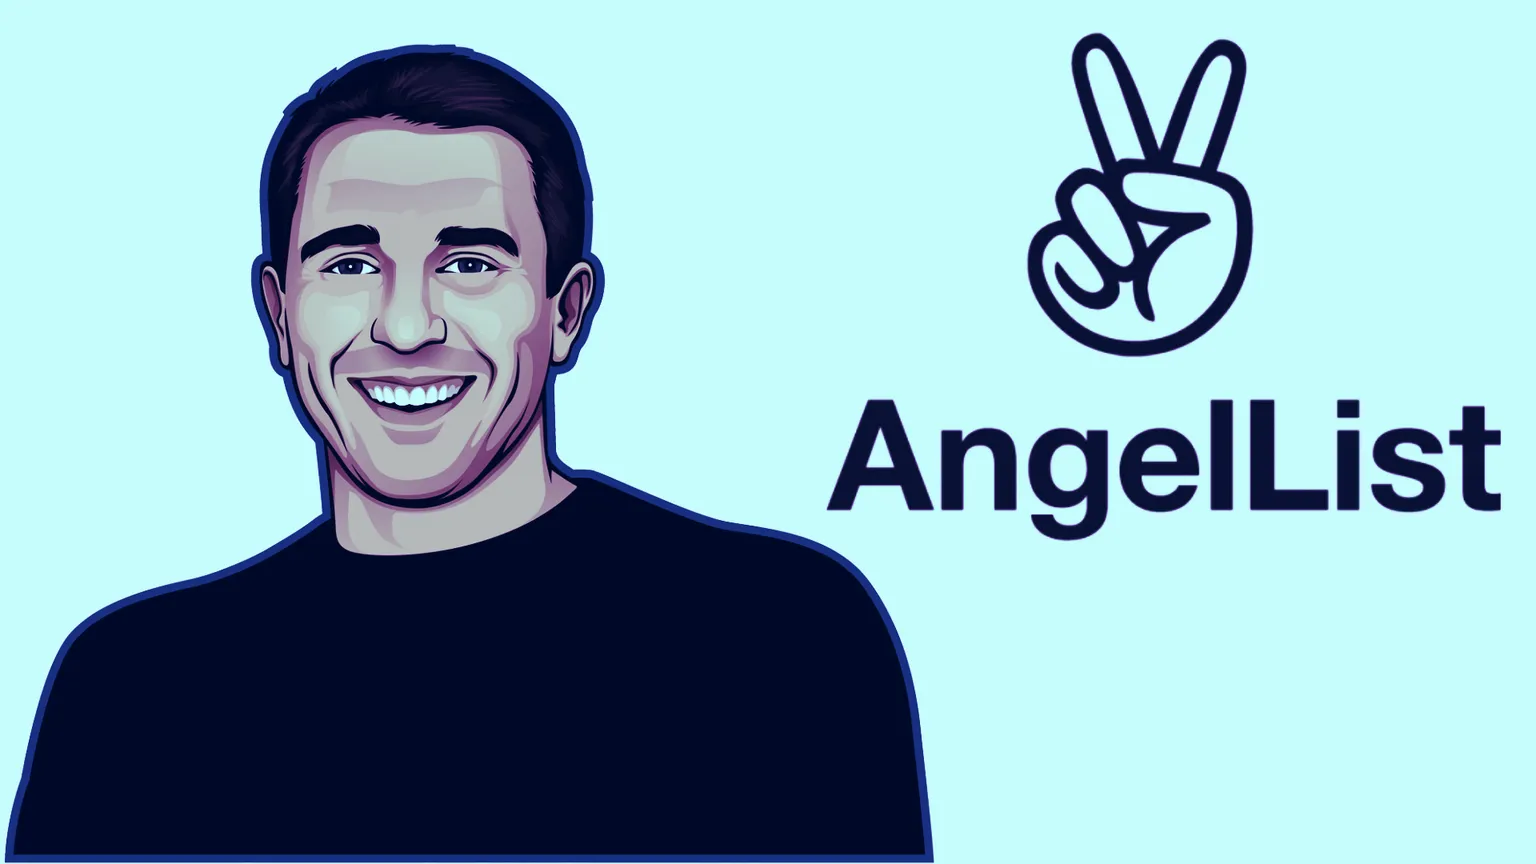 Anthony Pompliano has a new venture fund. Image: Pomp/Twitter